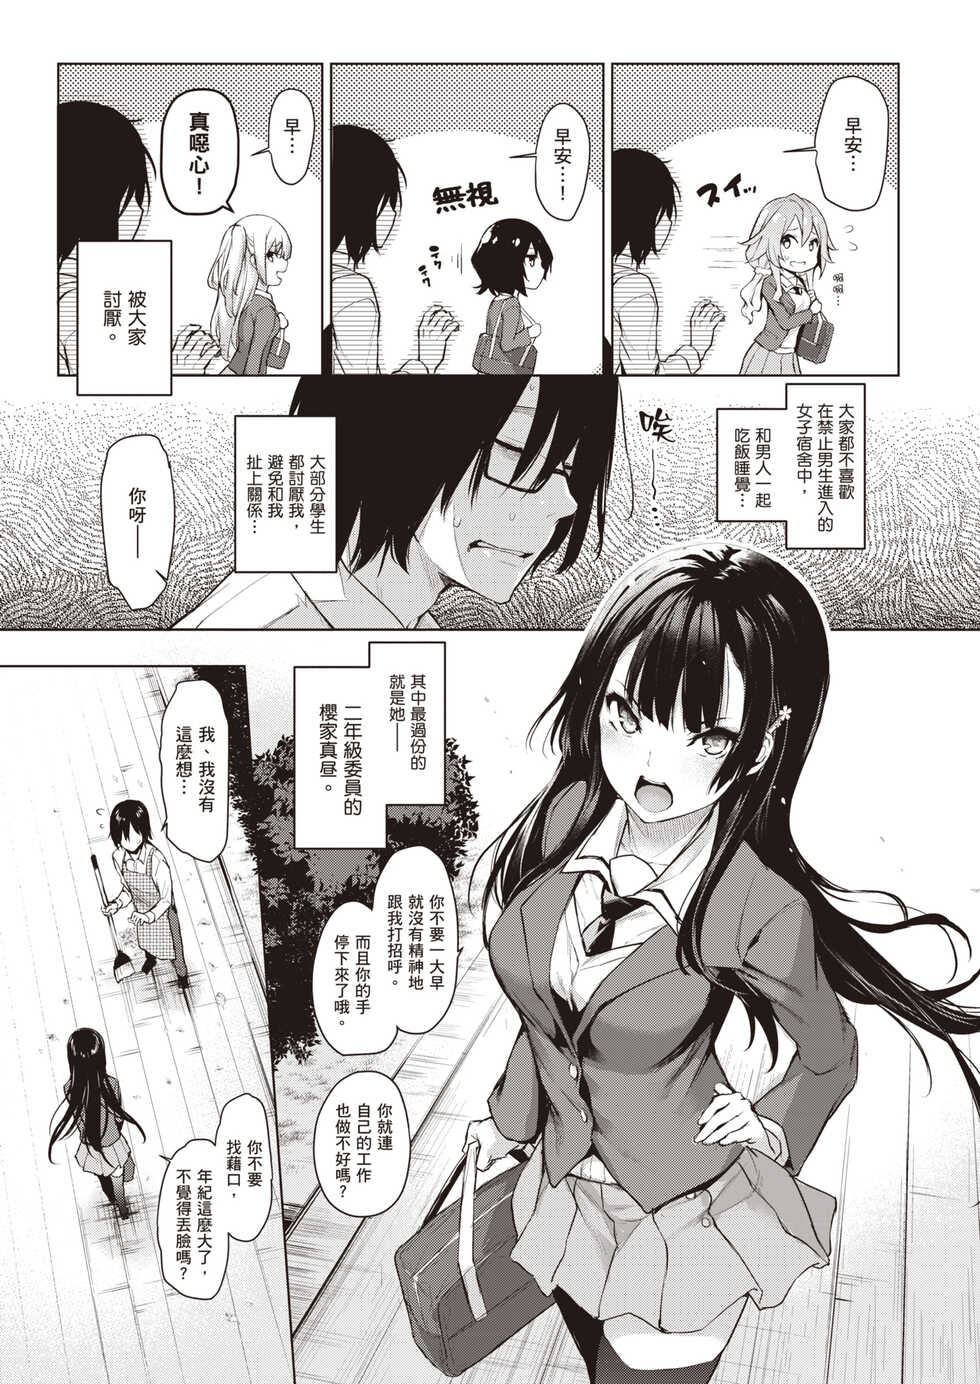 [Michiking] Ane Taiken Jogakuryou ~Limited Edition~ | 姊體驗女學寮～Limited Edition～ 特裝版 [Chinese] [Digital] - Page 16